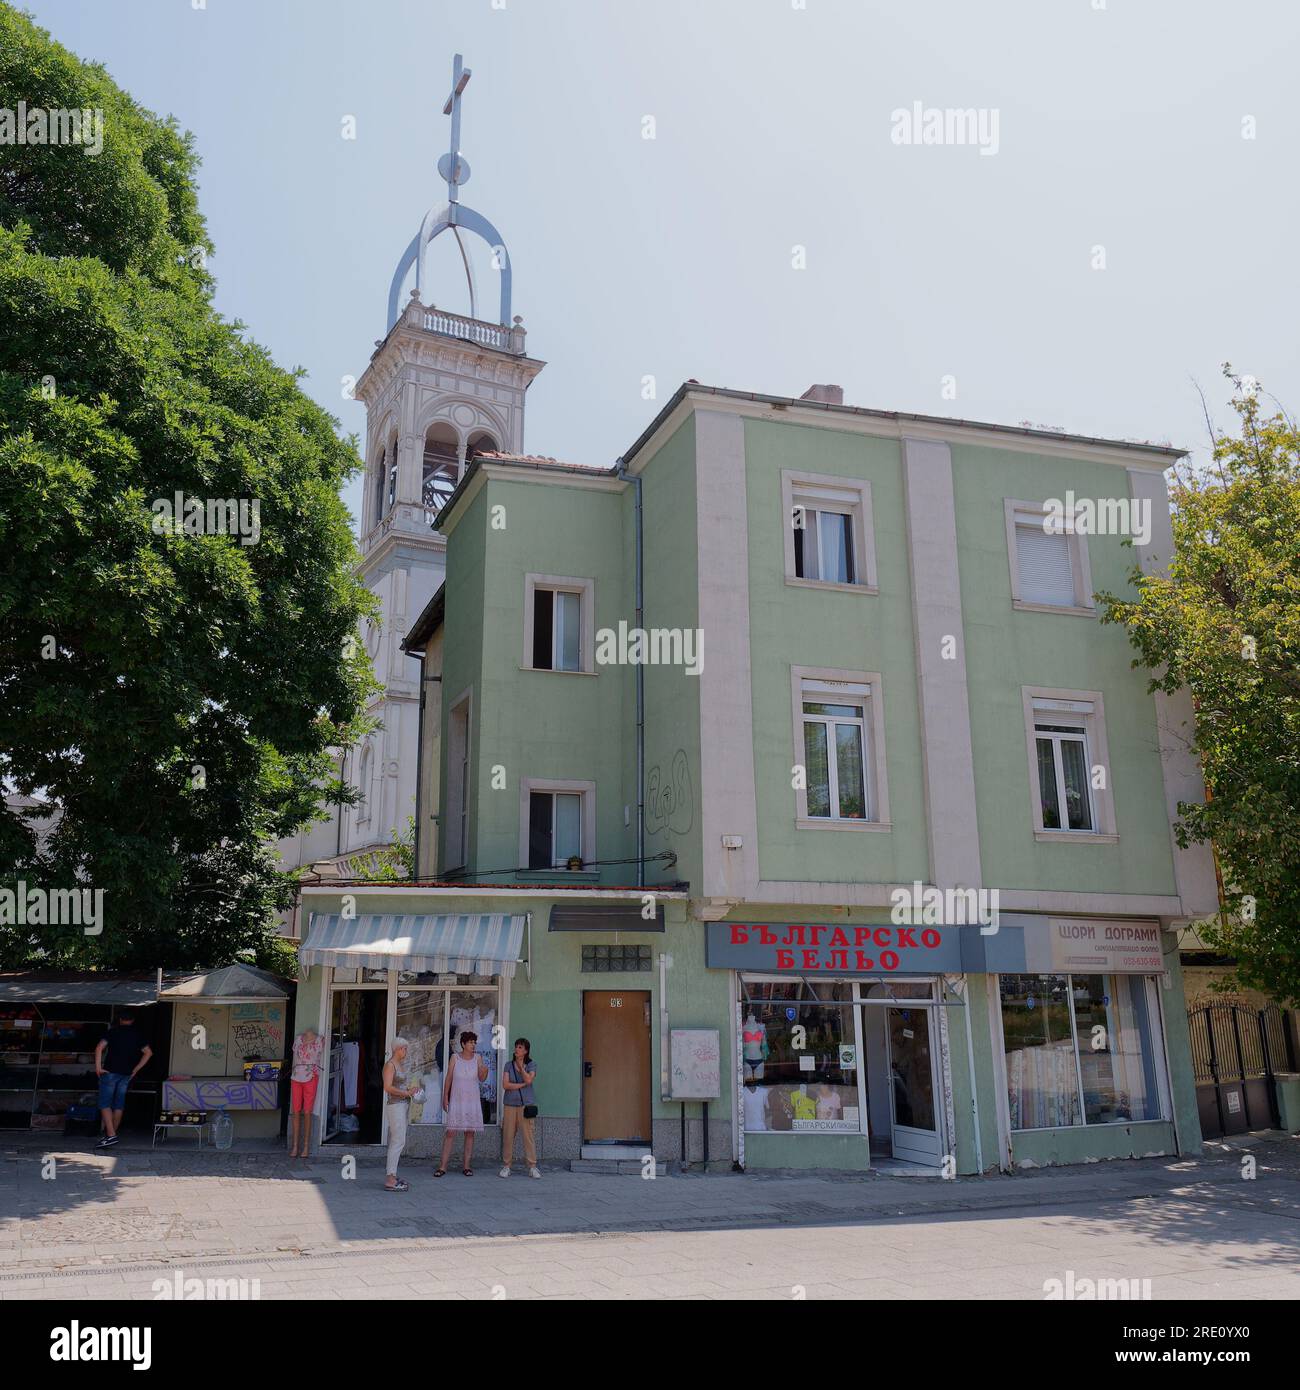 Women standing outside a woman's clothing shop rendered in green with church tower behind in Plovdiv, Bulgaria Stock Photo